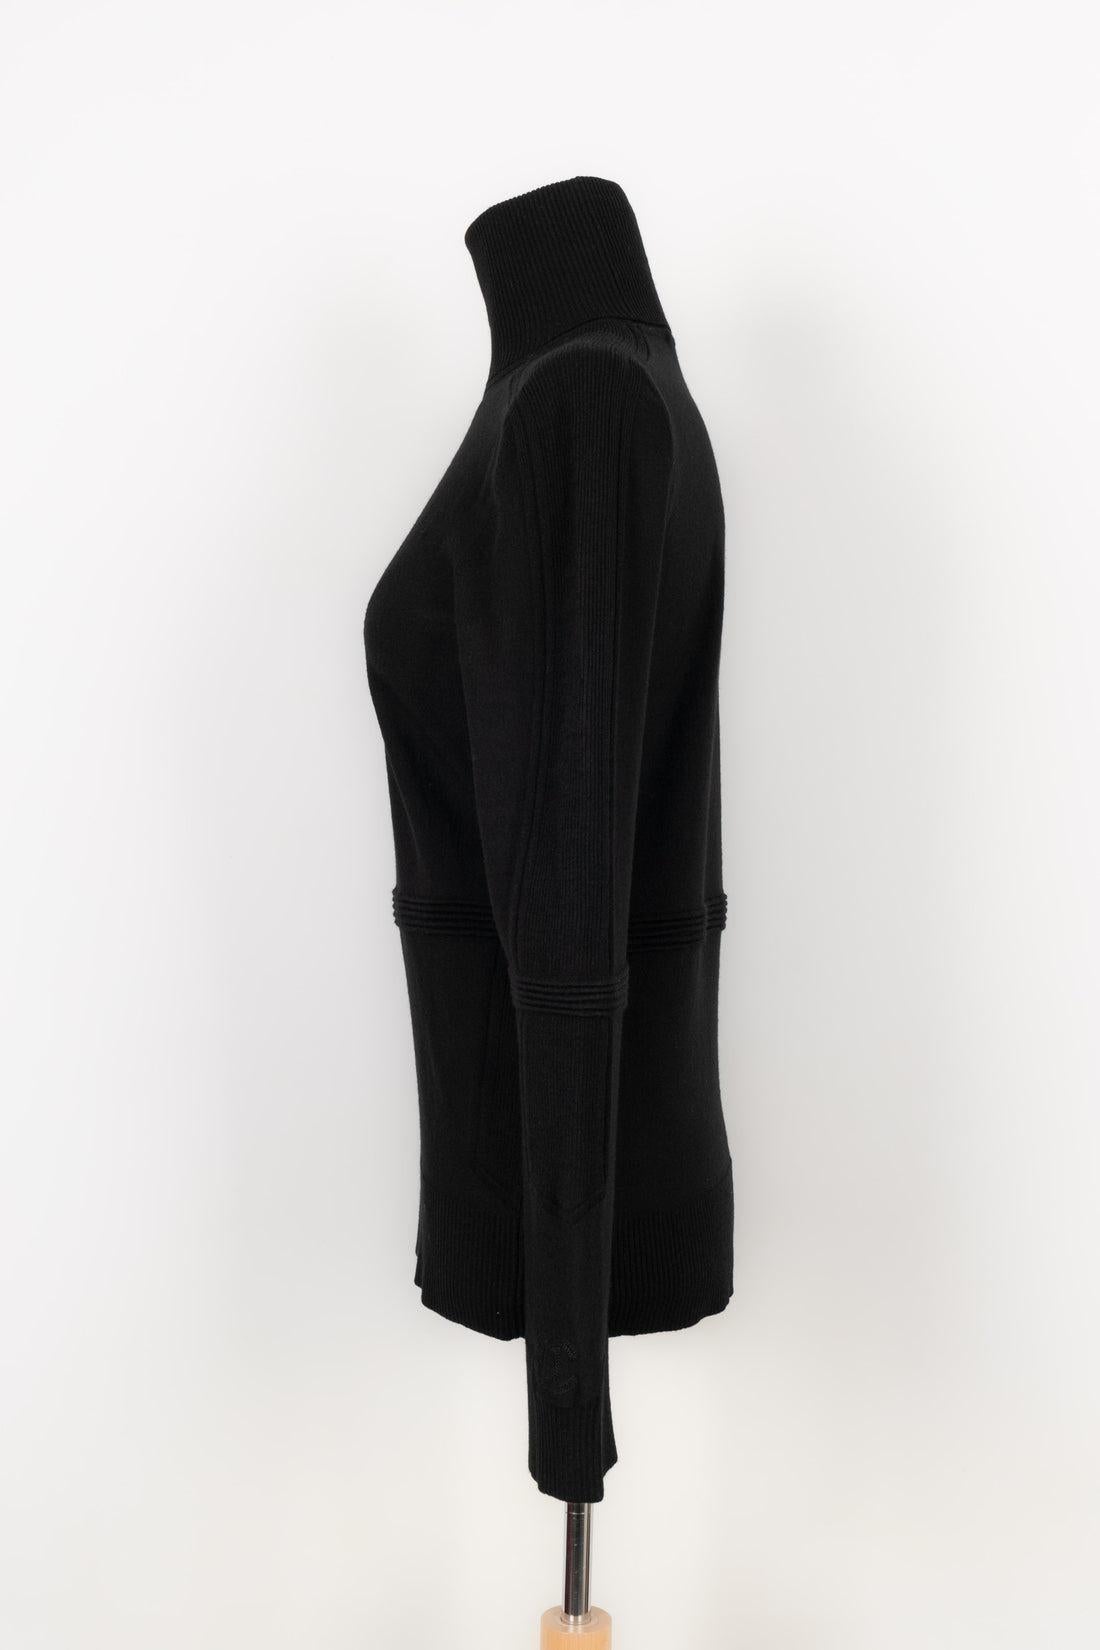 Chanel -Black wool turtleneck pullover. No size indicated, it fits a 38FR.

Additional Information:
Condition: Very good condition
Dimensions: Shoulder width: 40 cm - Chest: 43 cm - Sleeve length: 64 cm - Length: 64 cm

Seller Reference: FH161 